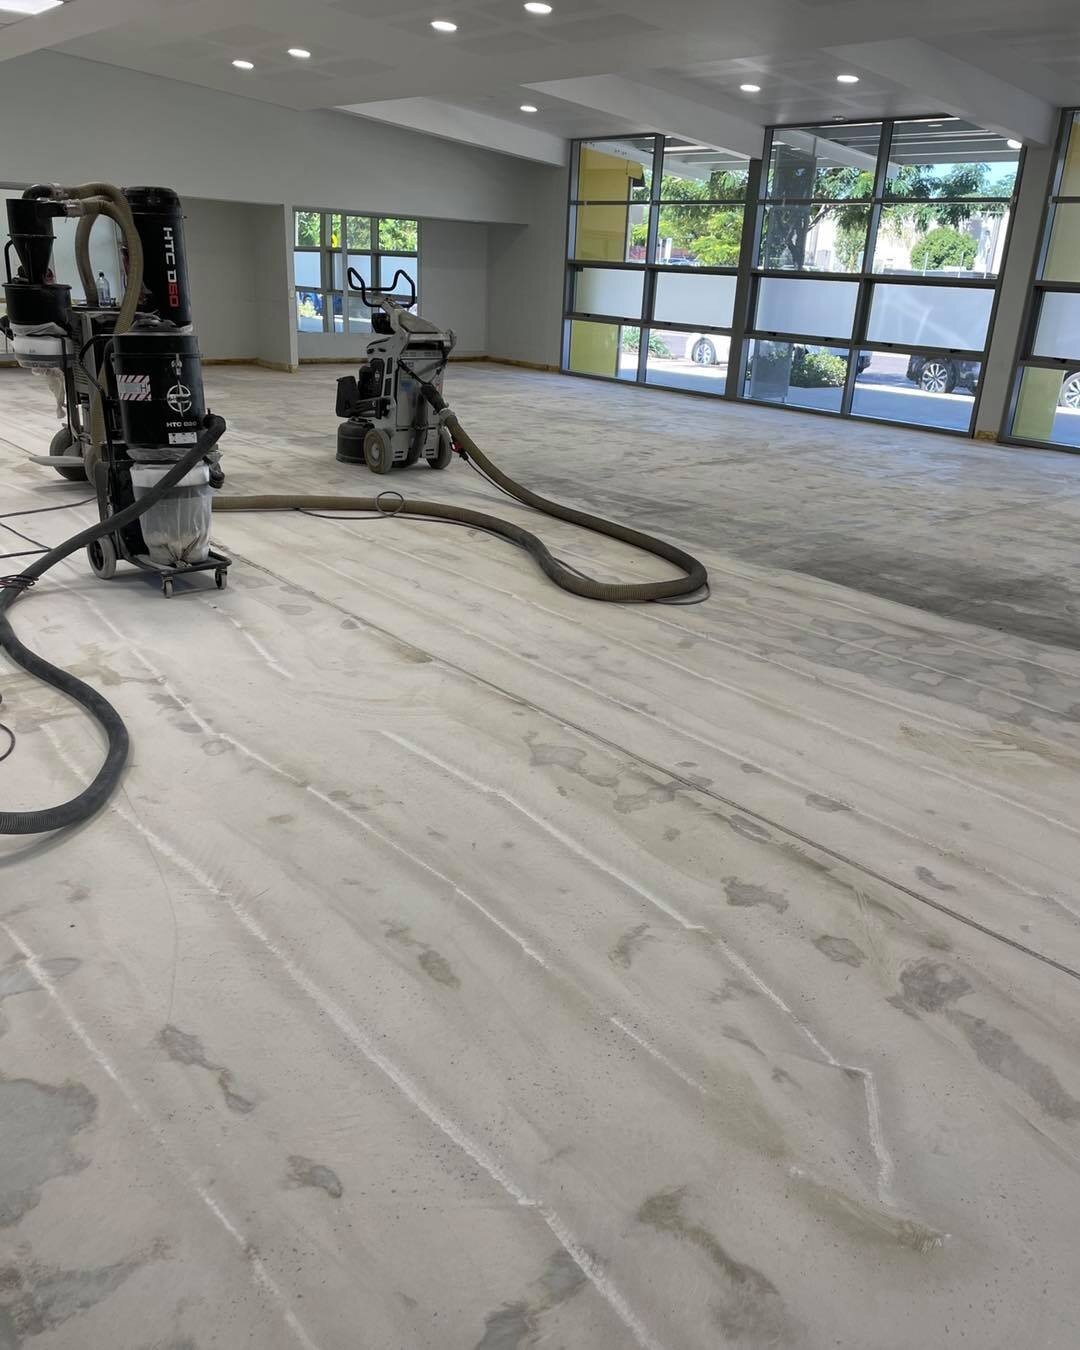 Not a bad day in the YMCA_Palmerston

|| VINYL UPLIFT &amp; INSTALL ||

Installed for @carpetonedarwin 

.
.
.
.
.
#darwin #darwinnt #darwinaustralia #floorprep #vinylinstallation #floorformnt #darwinvinyl #ymcadarwin #YMCA